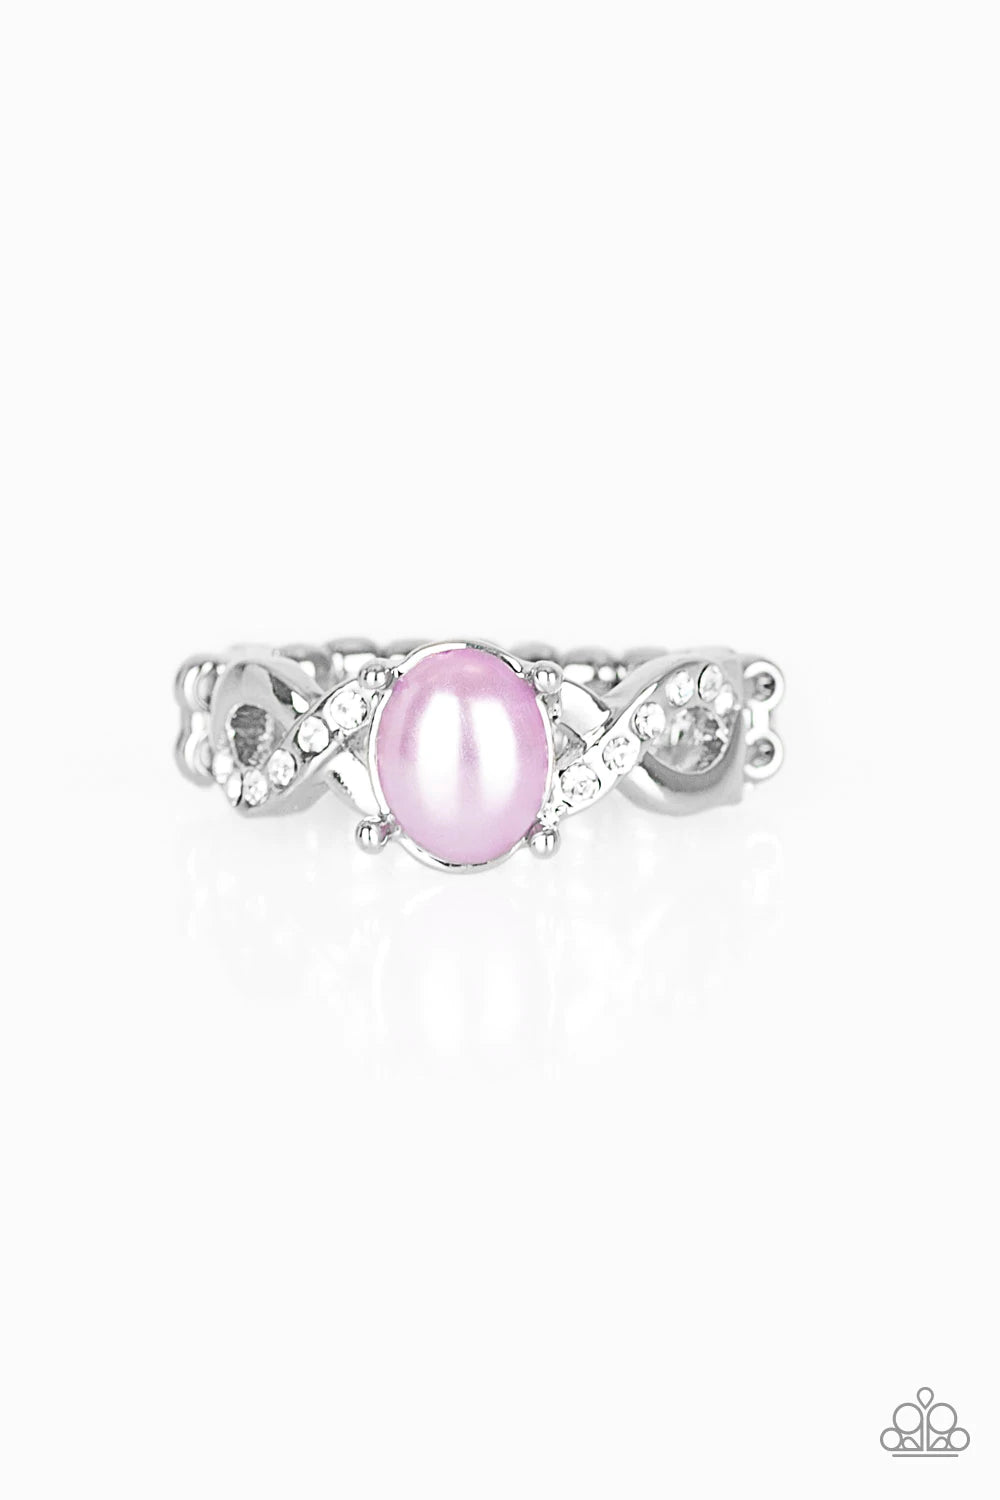 Paparazzi Accessories  - Limitless Luminosity #RR1/F5 - Pink Ring